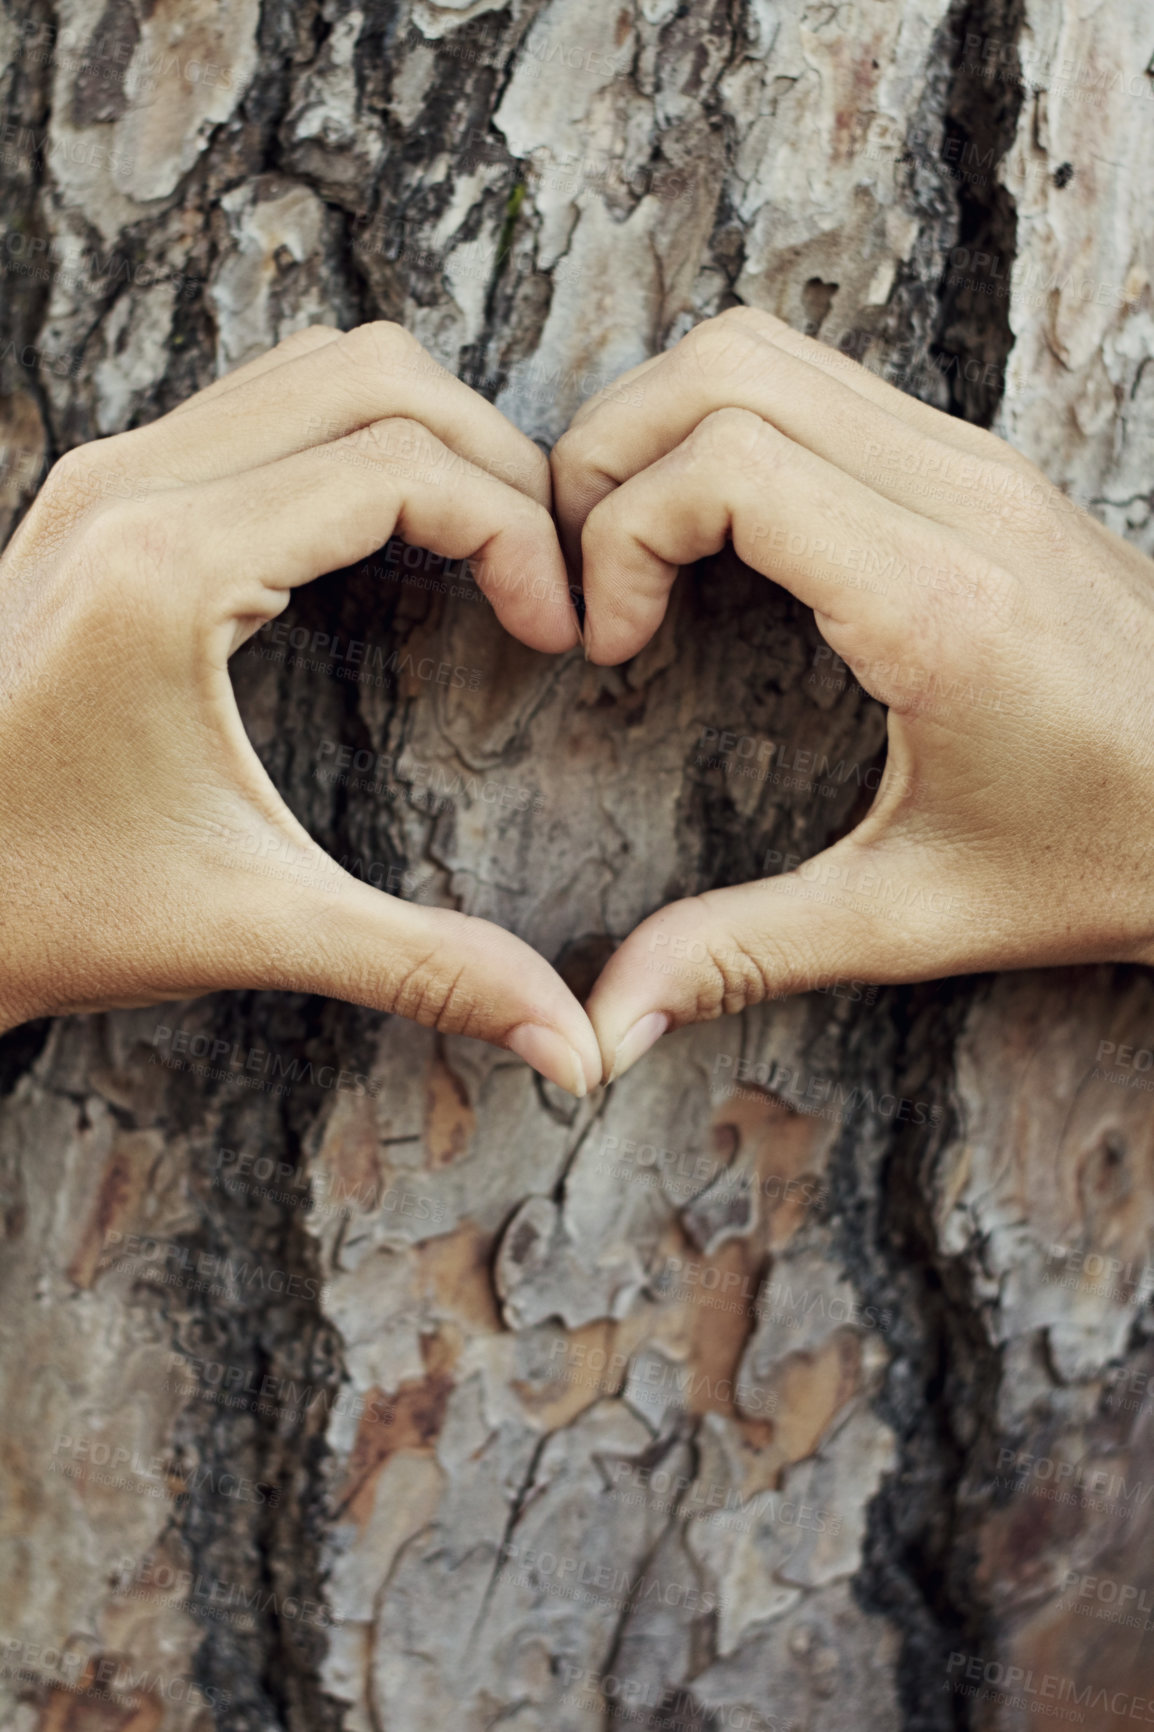 Buy stock photo Closeup shot of hands forming a heart-shape against a tree